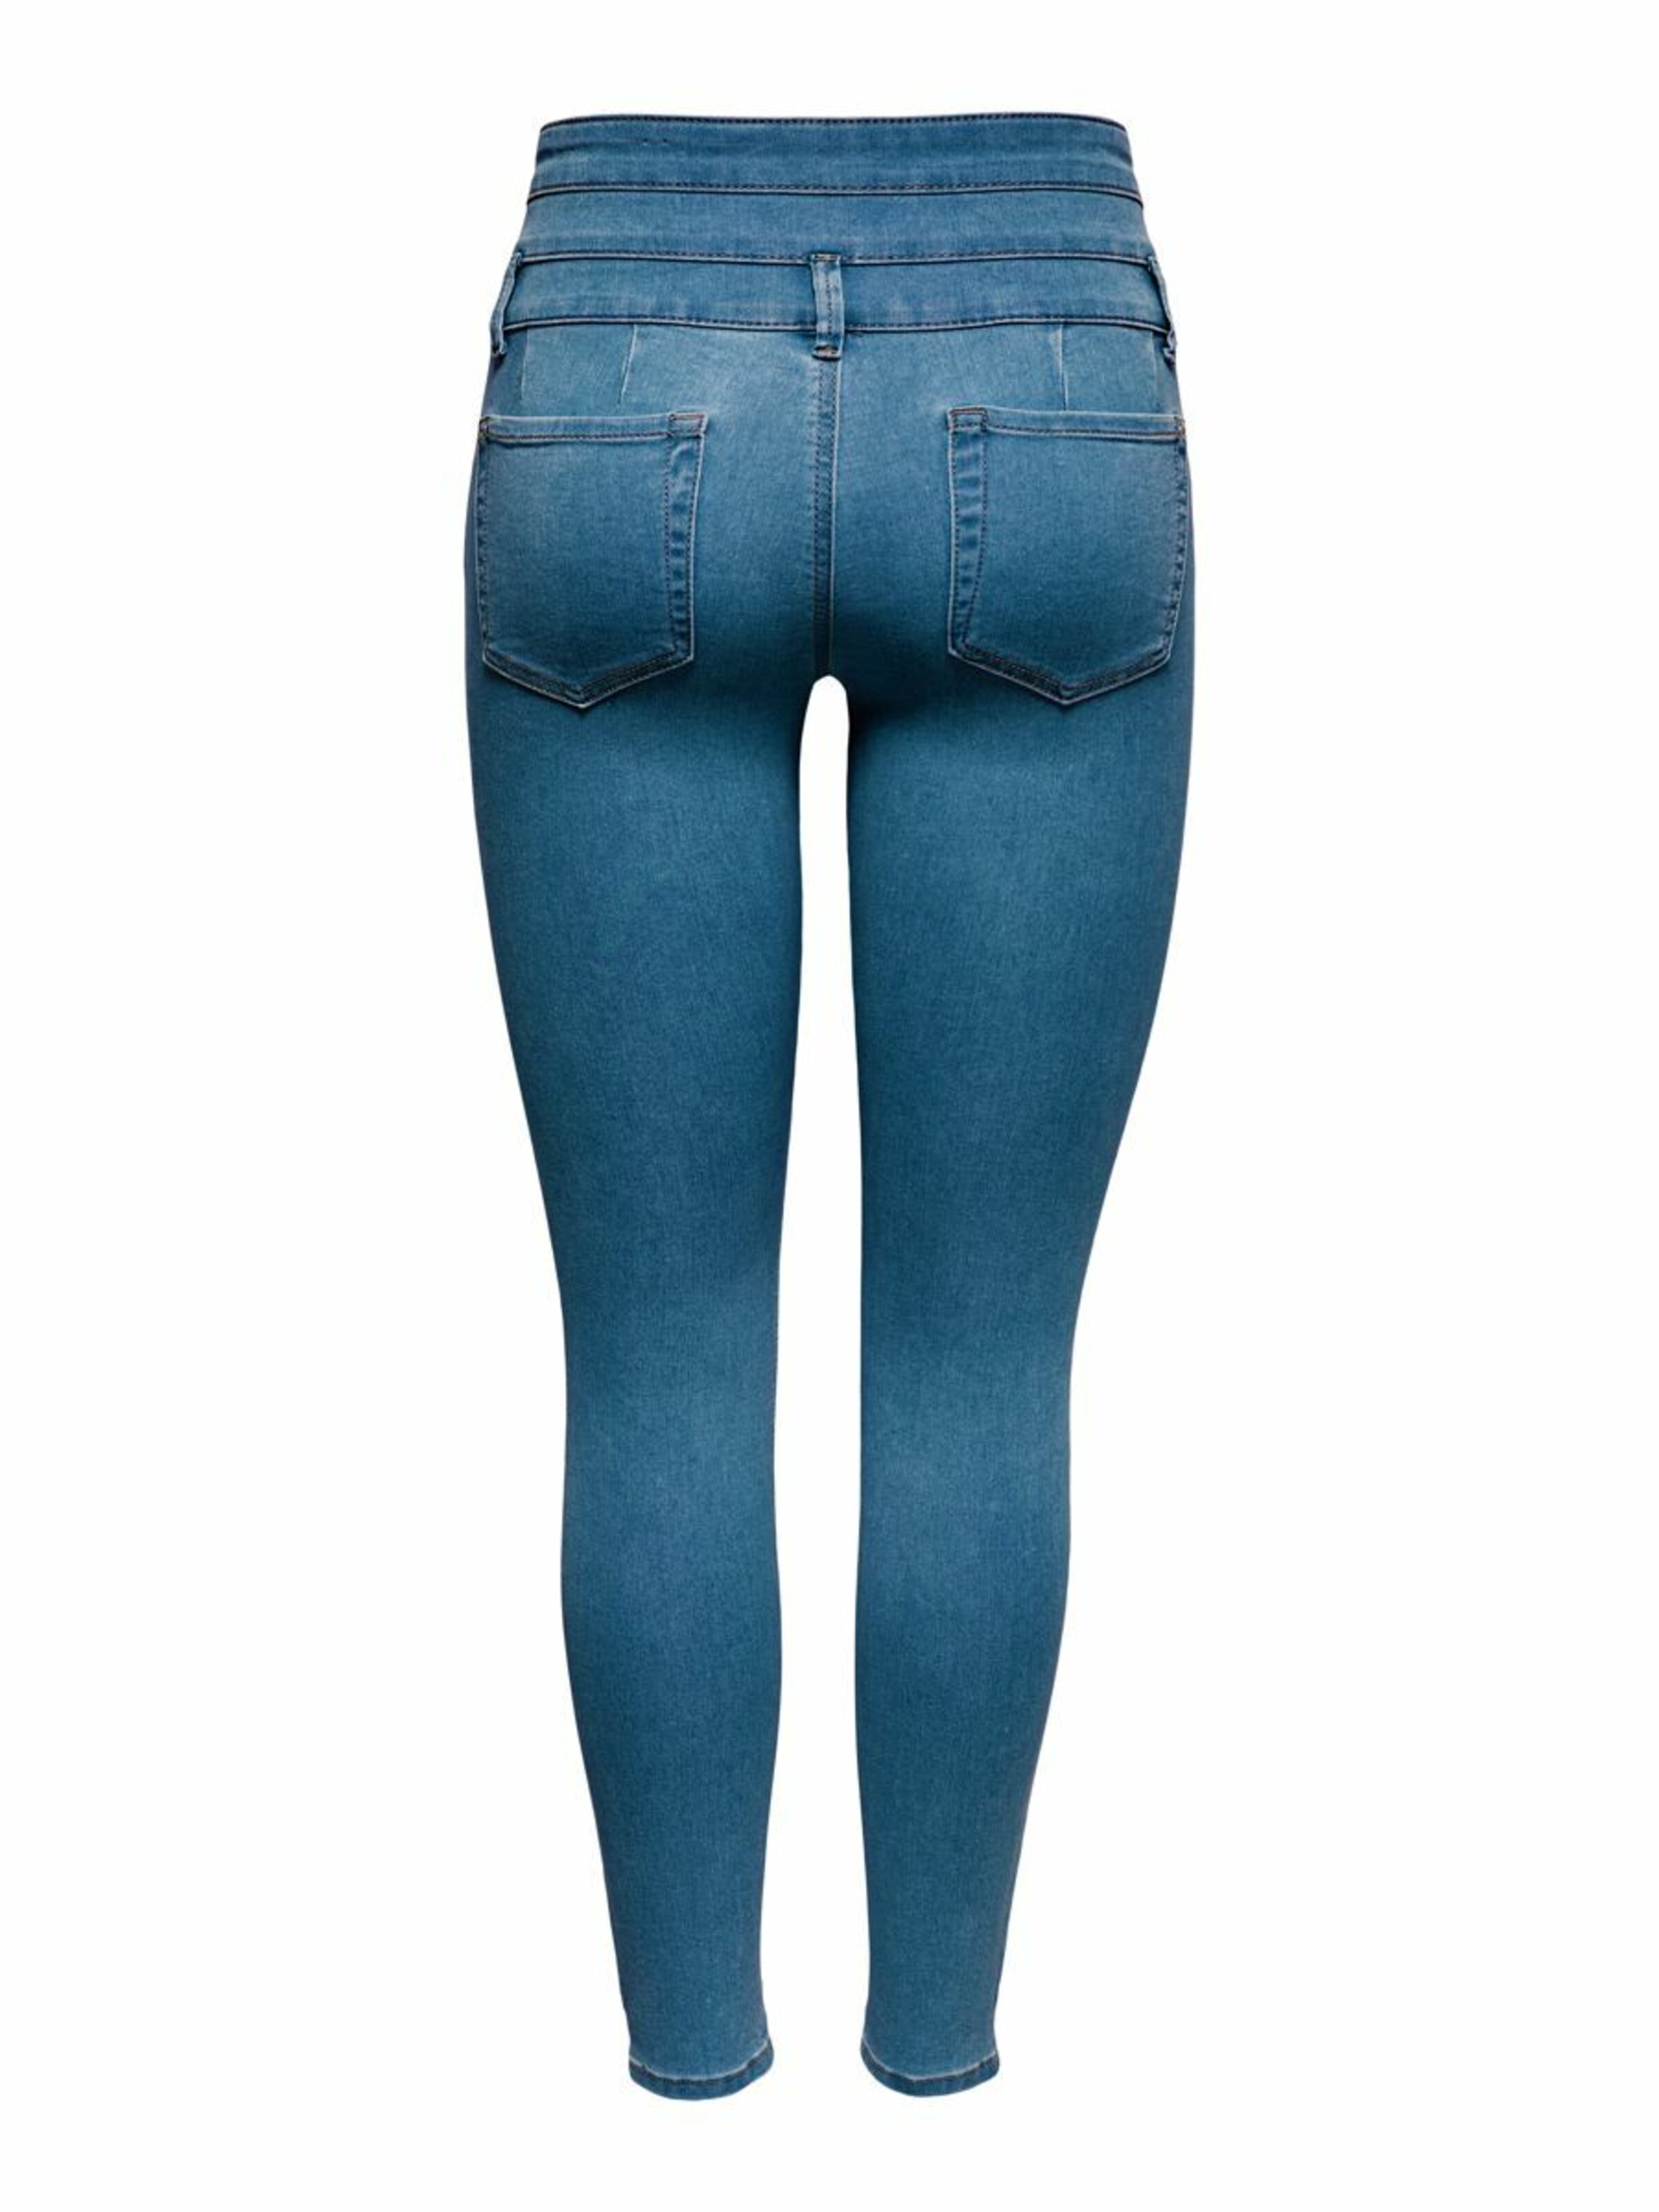 Only Petite Jeans Royal in Blau 